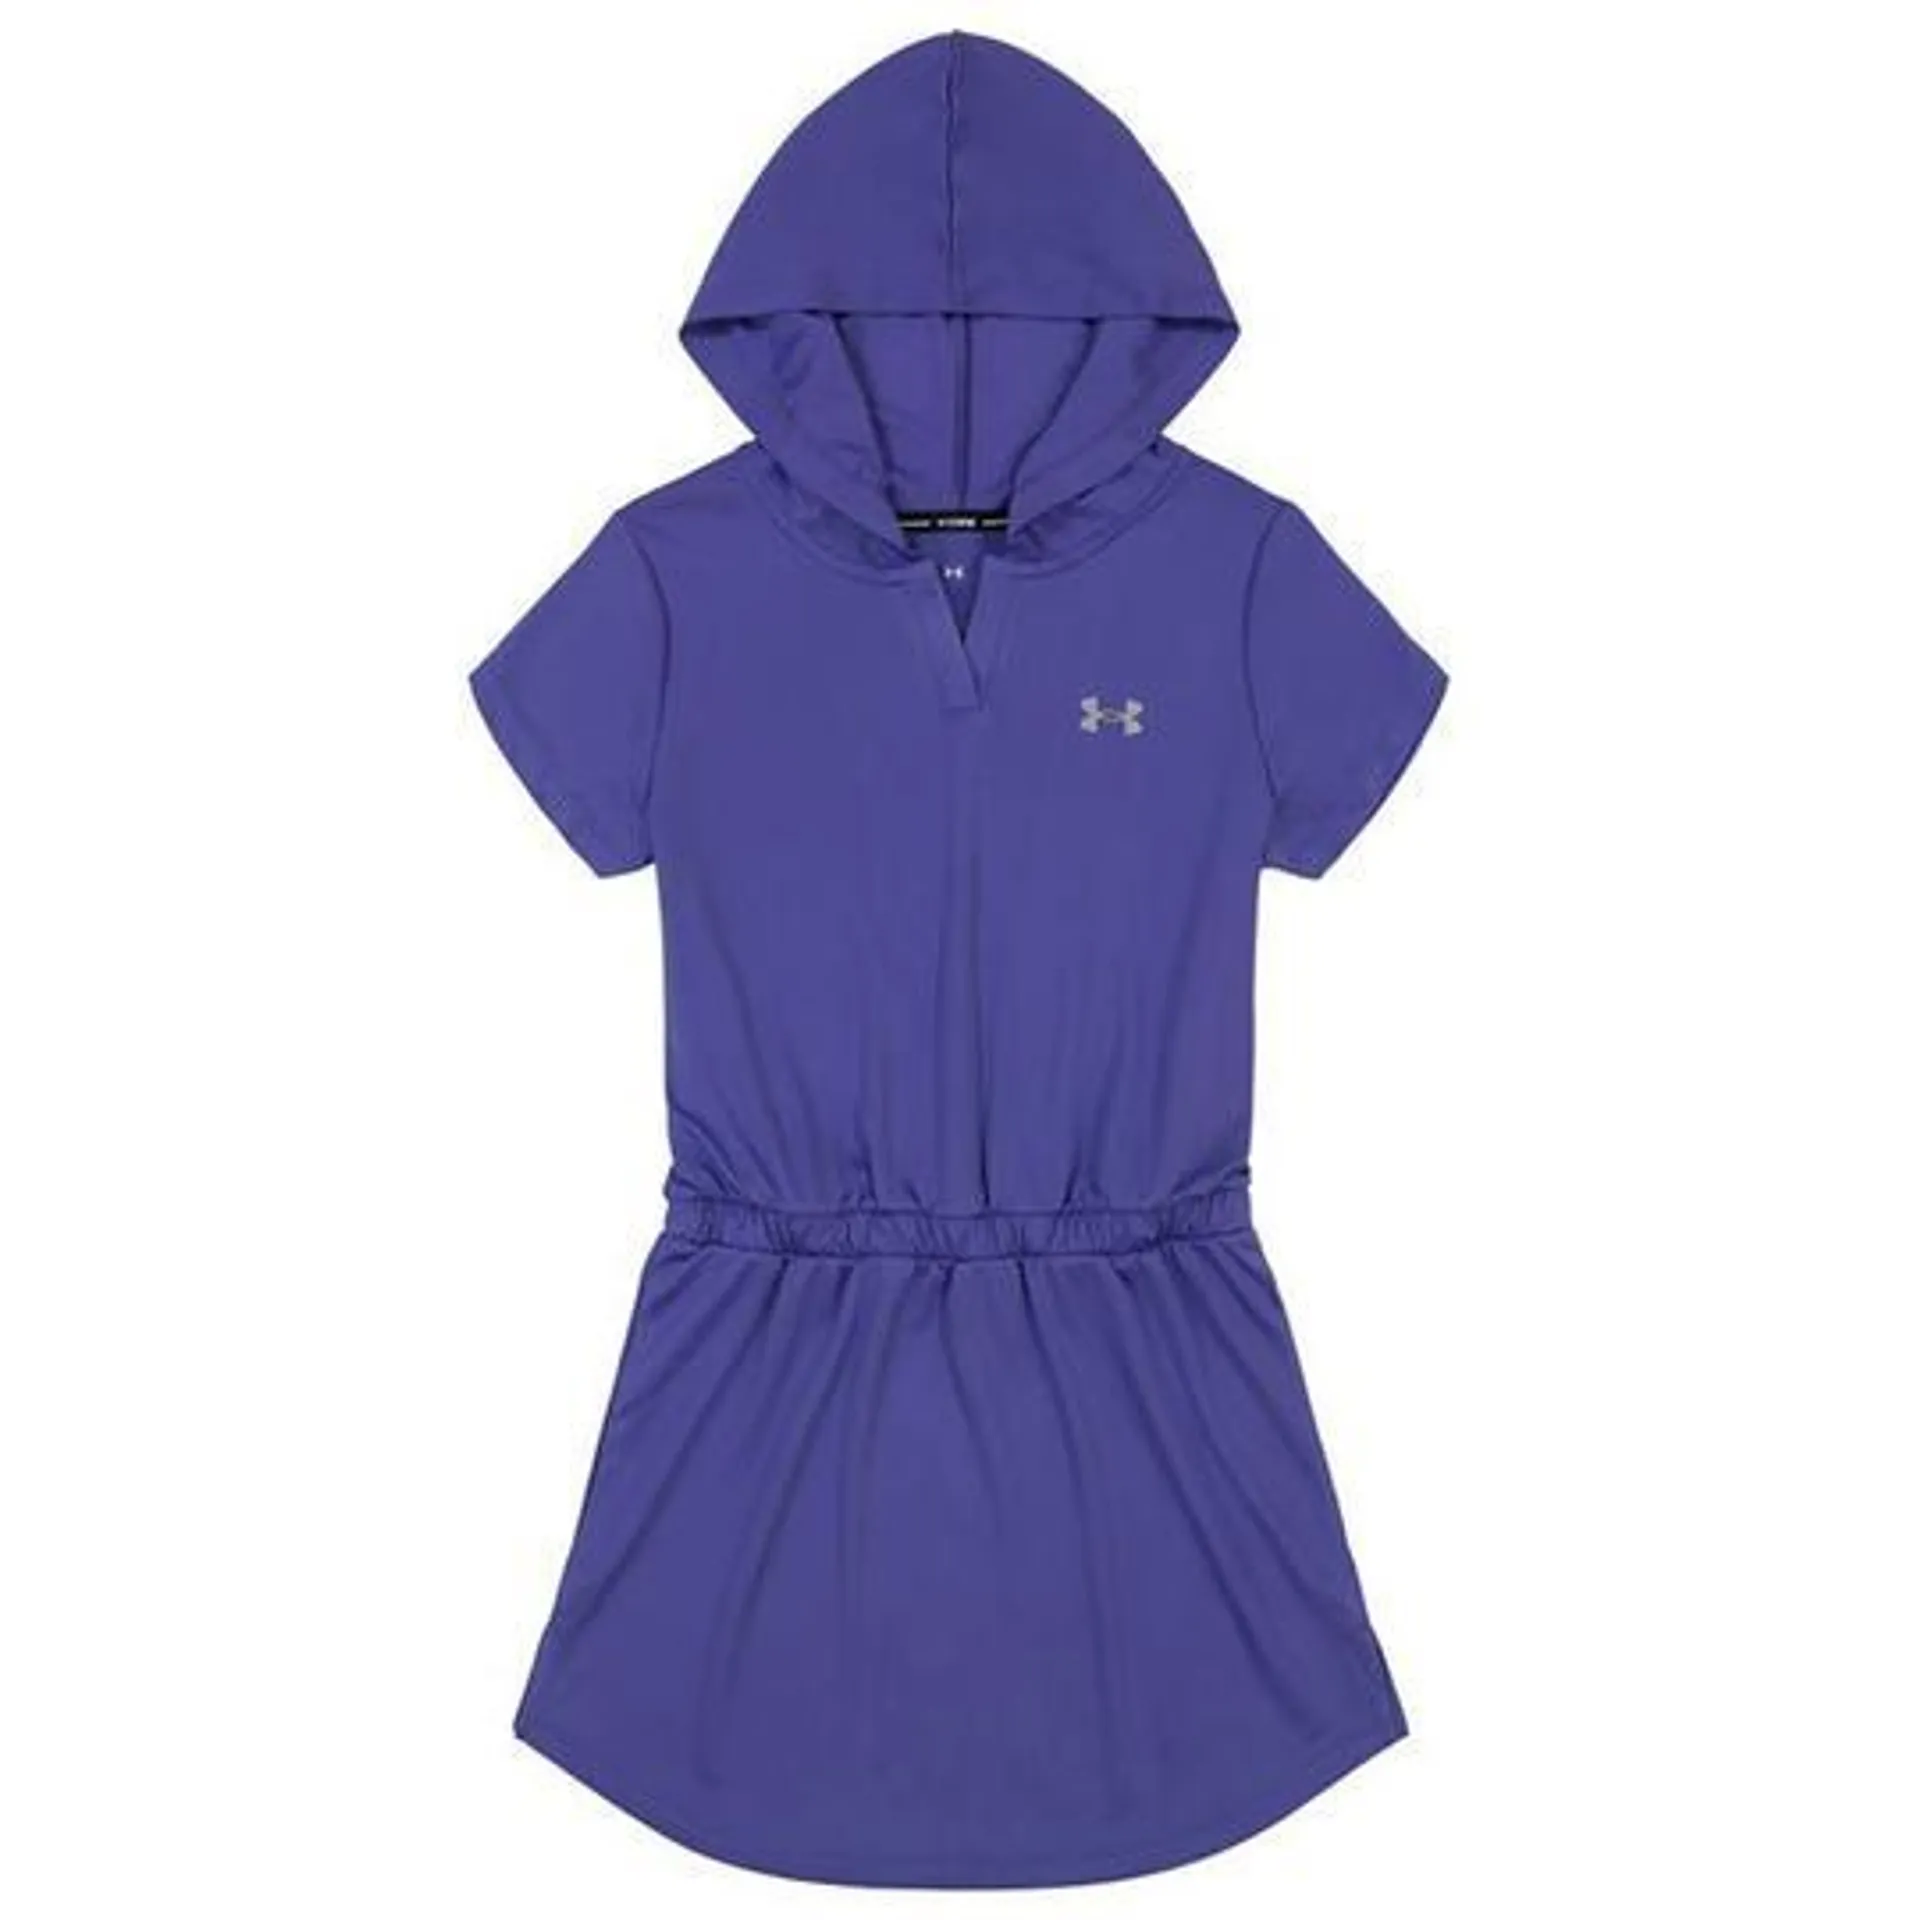 Junior Girls' [7-16] Jersey Hooded Cover-Up